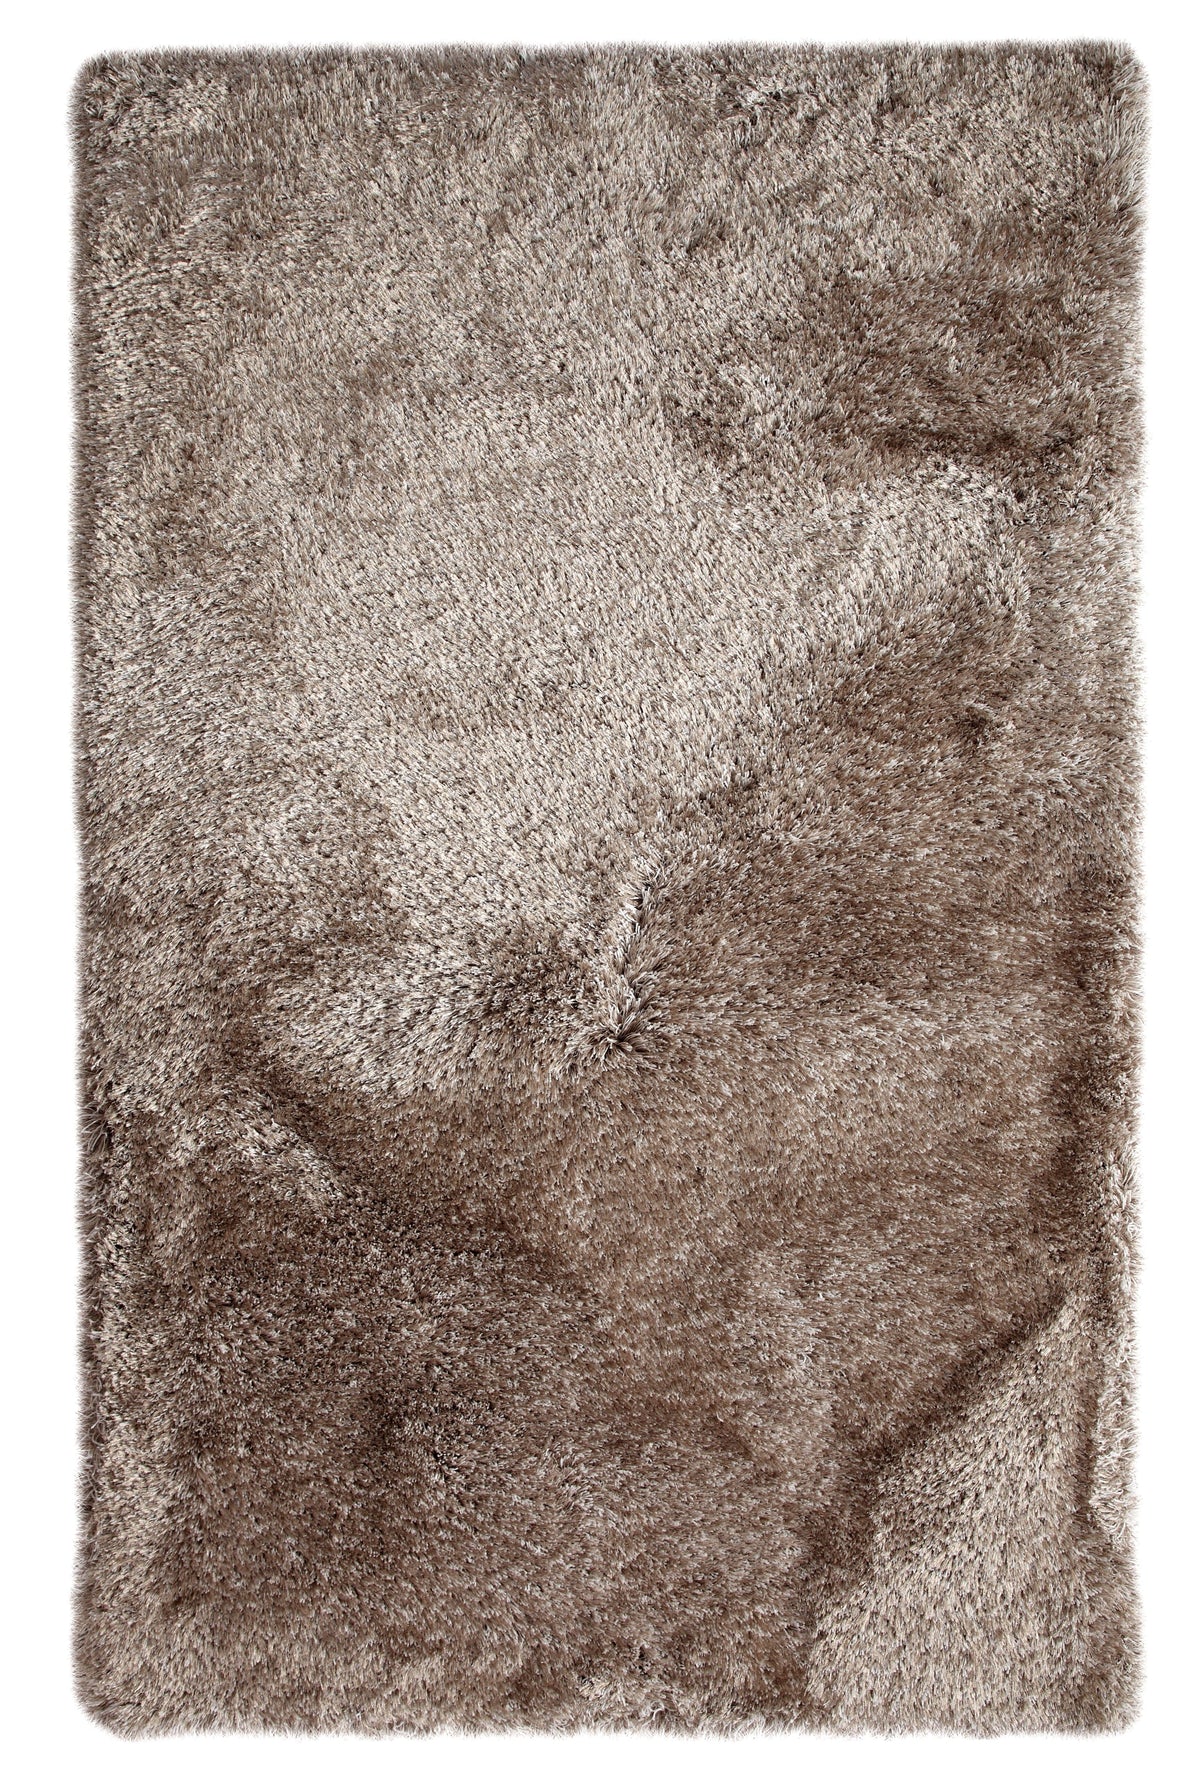 Anne Klein Stone The Exquisite Solid Rug Collection